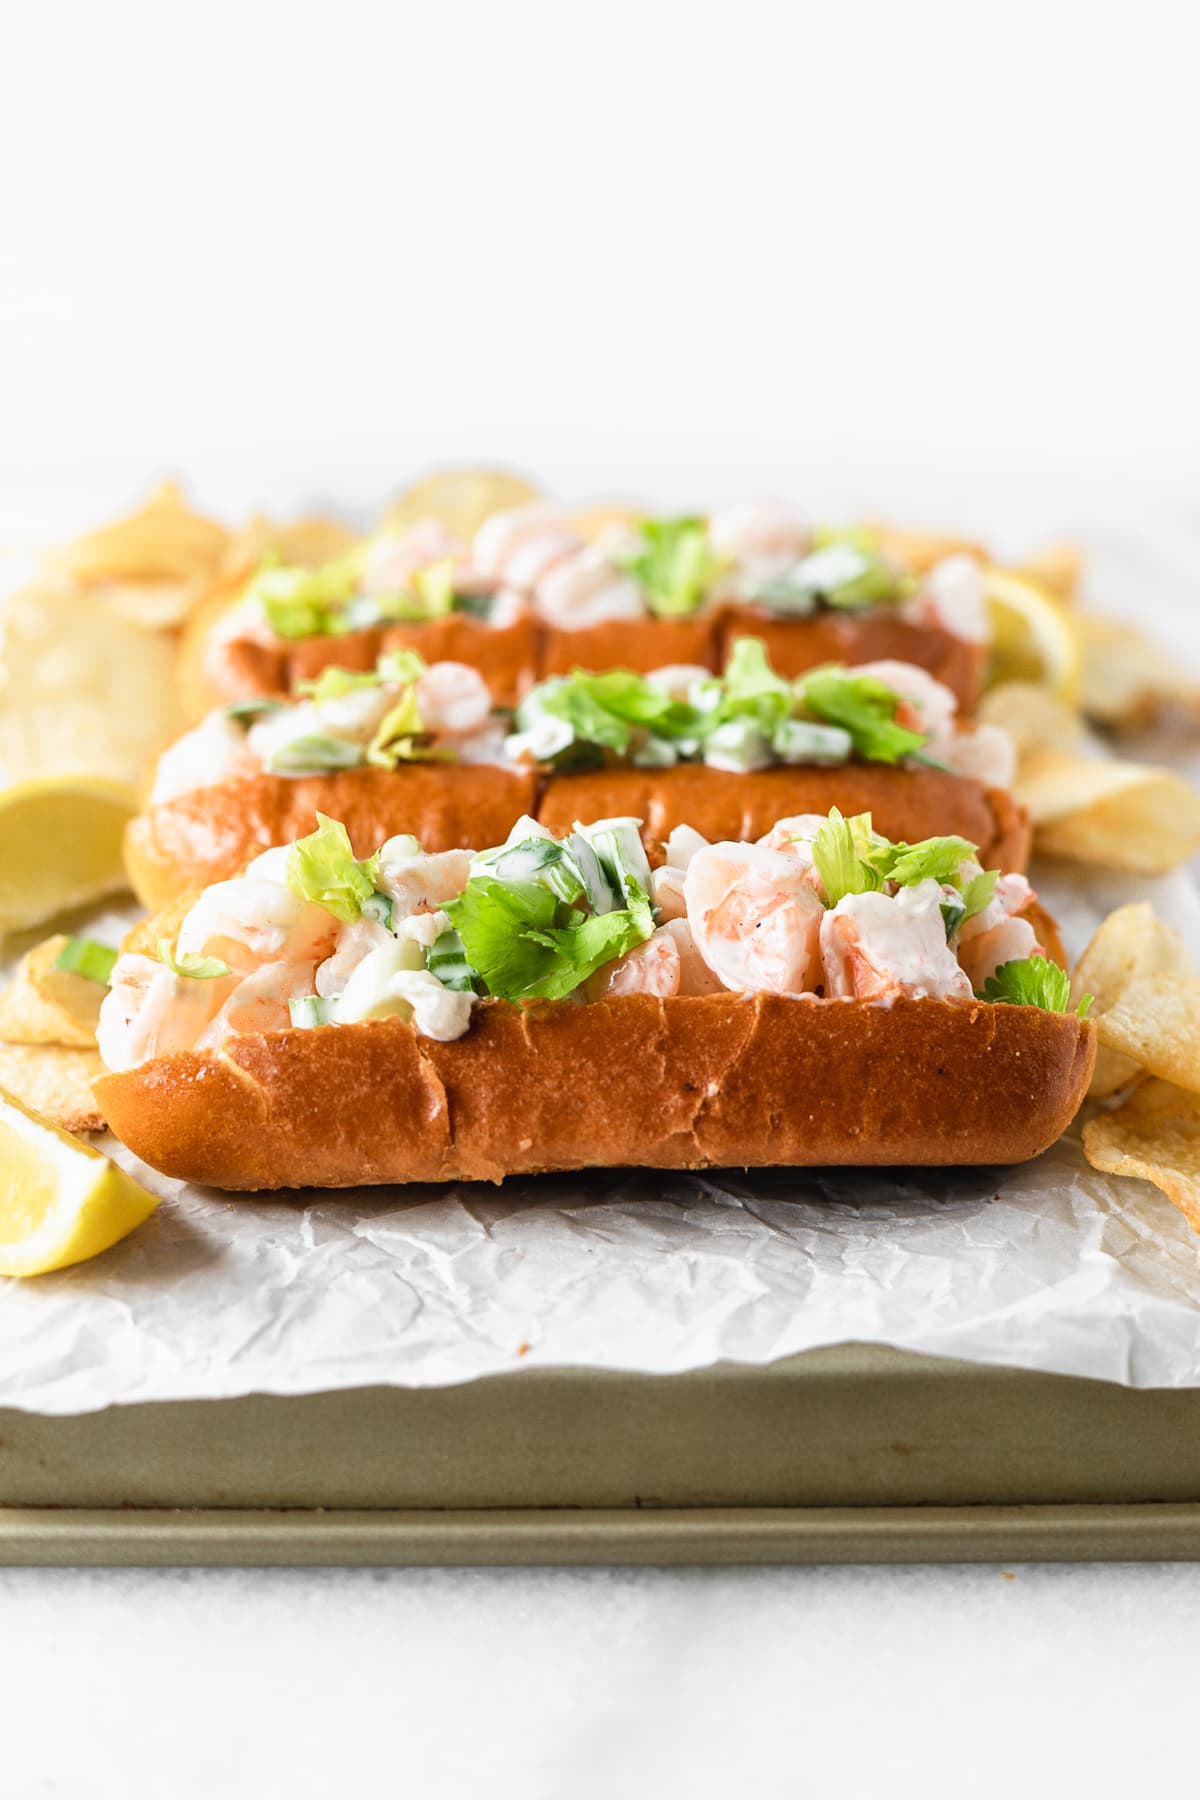 new england style shrimp rolls on a parchment lined tray with lemon wedges and potato chips.